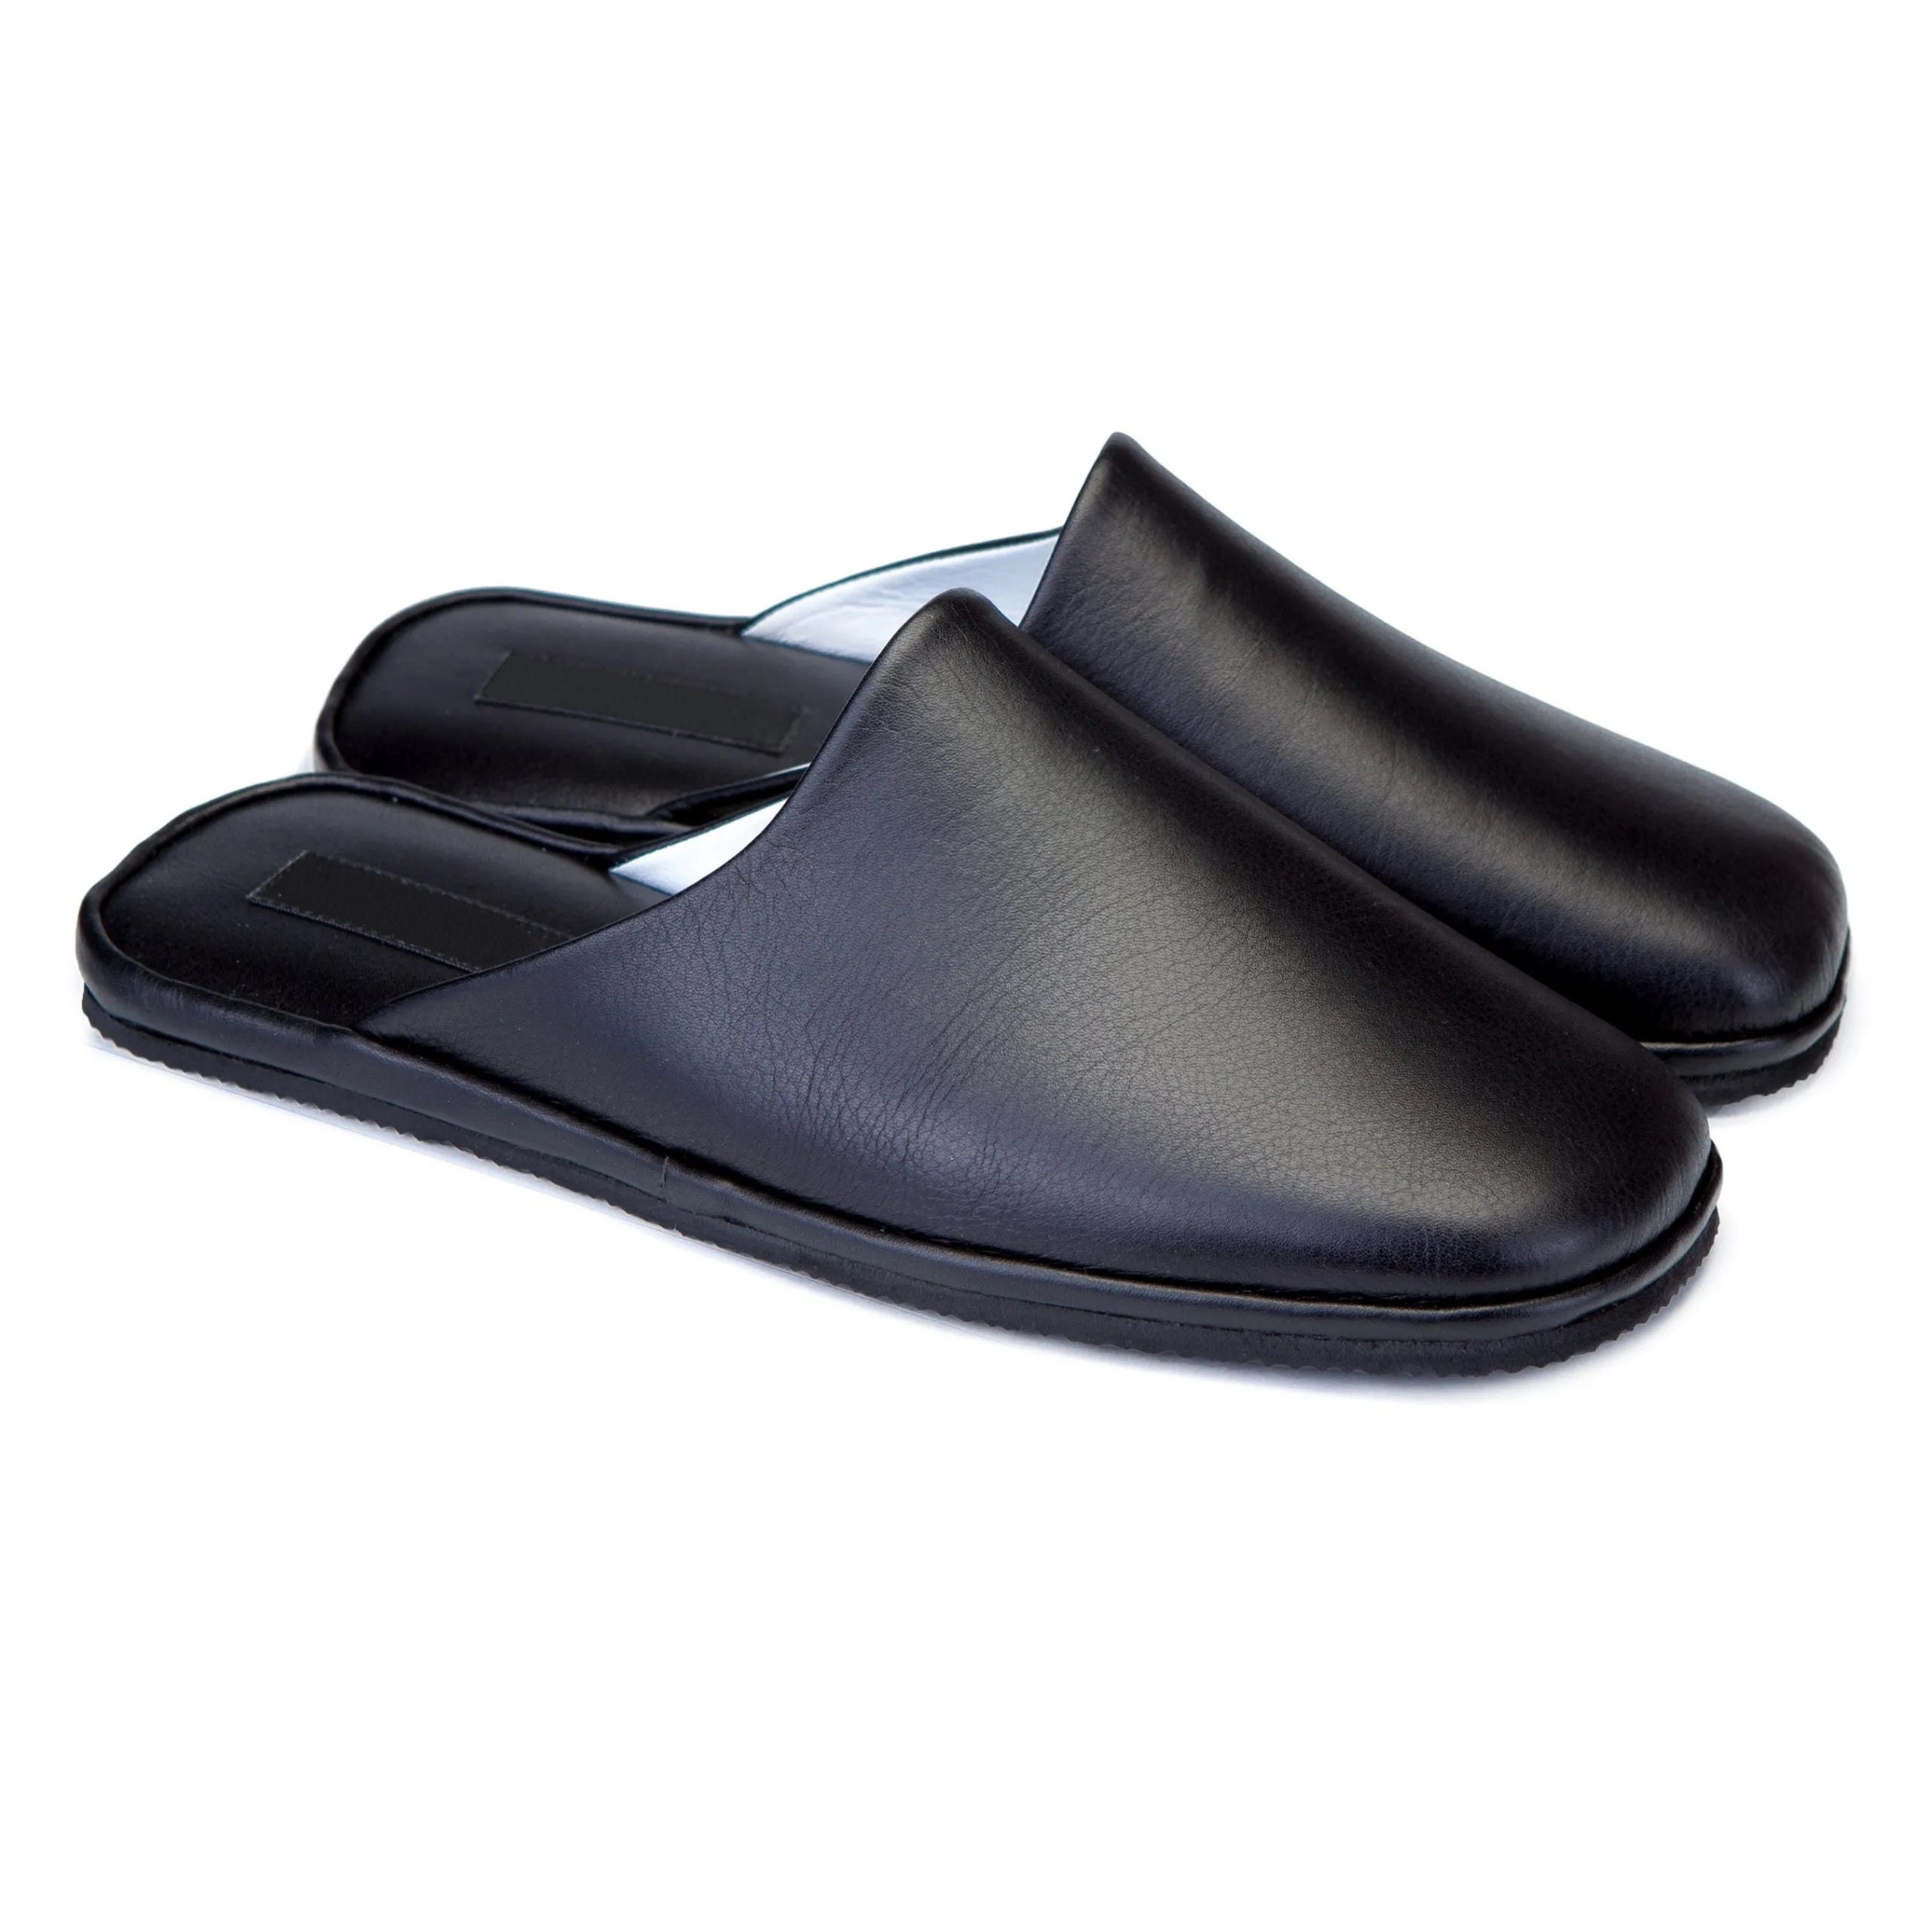 Black Leather Slippers for Men, Soft Leather Slippers, Closed Toe ...